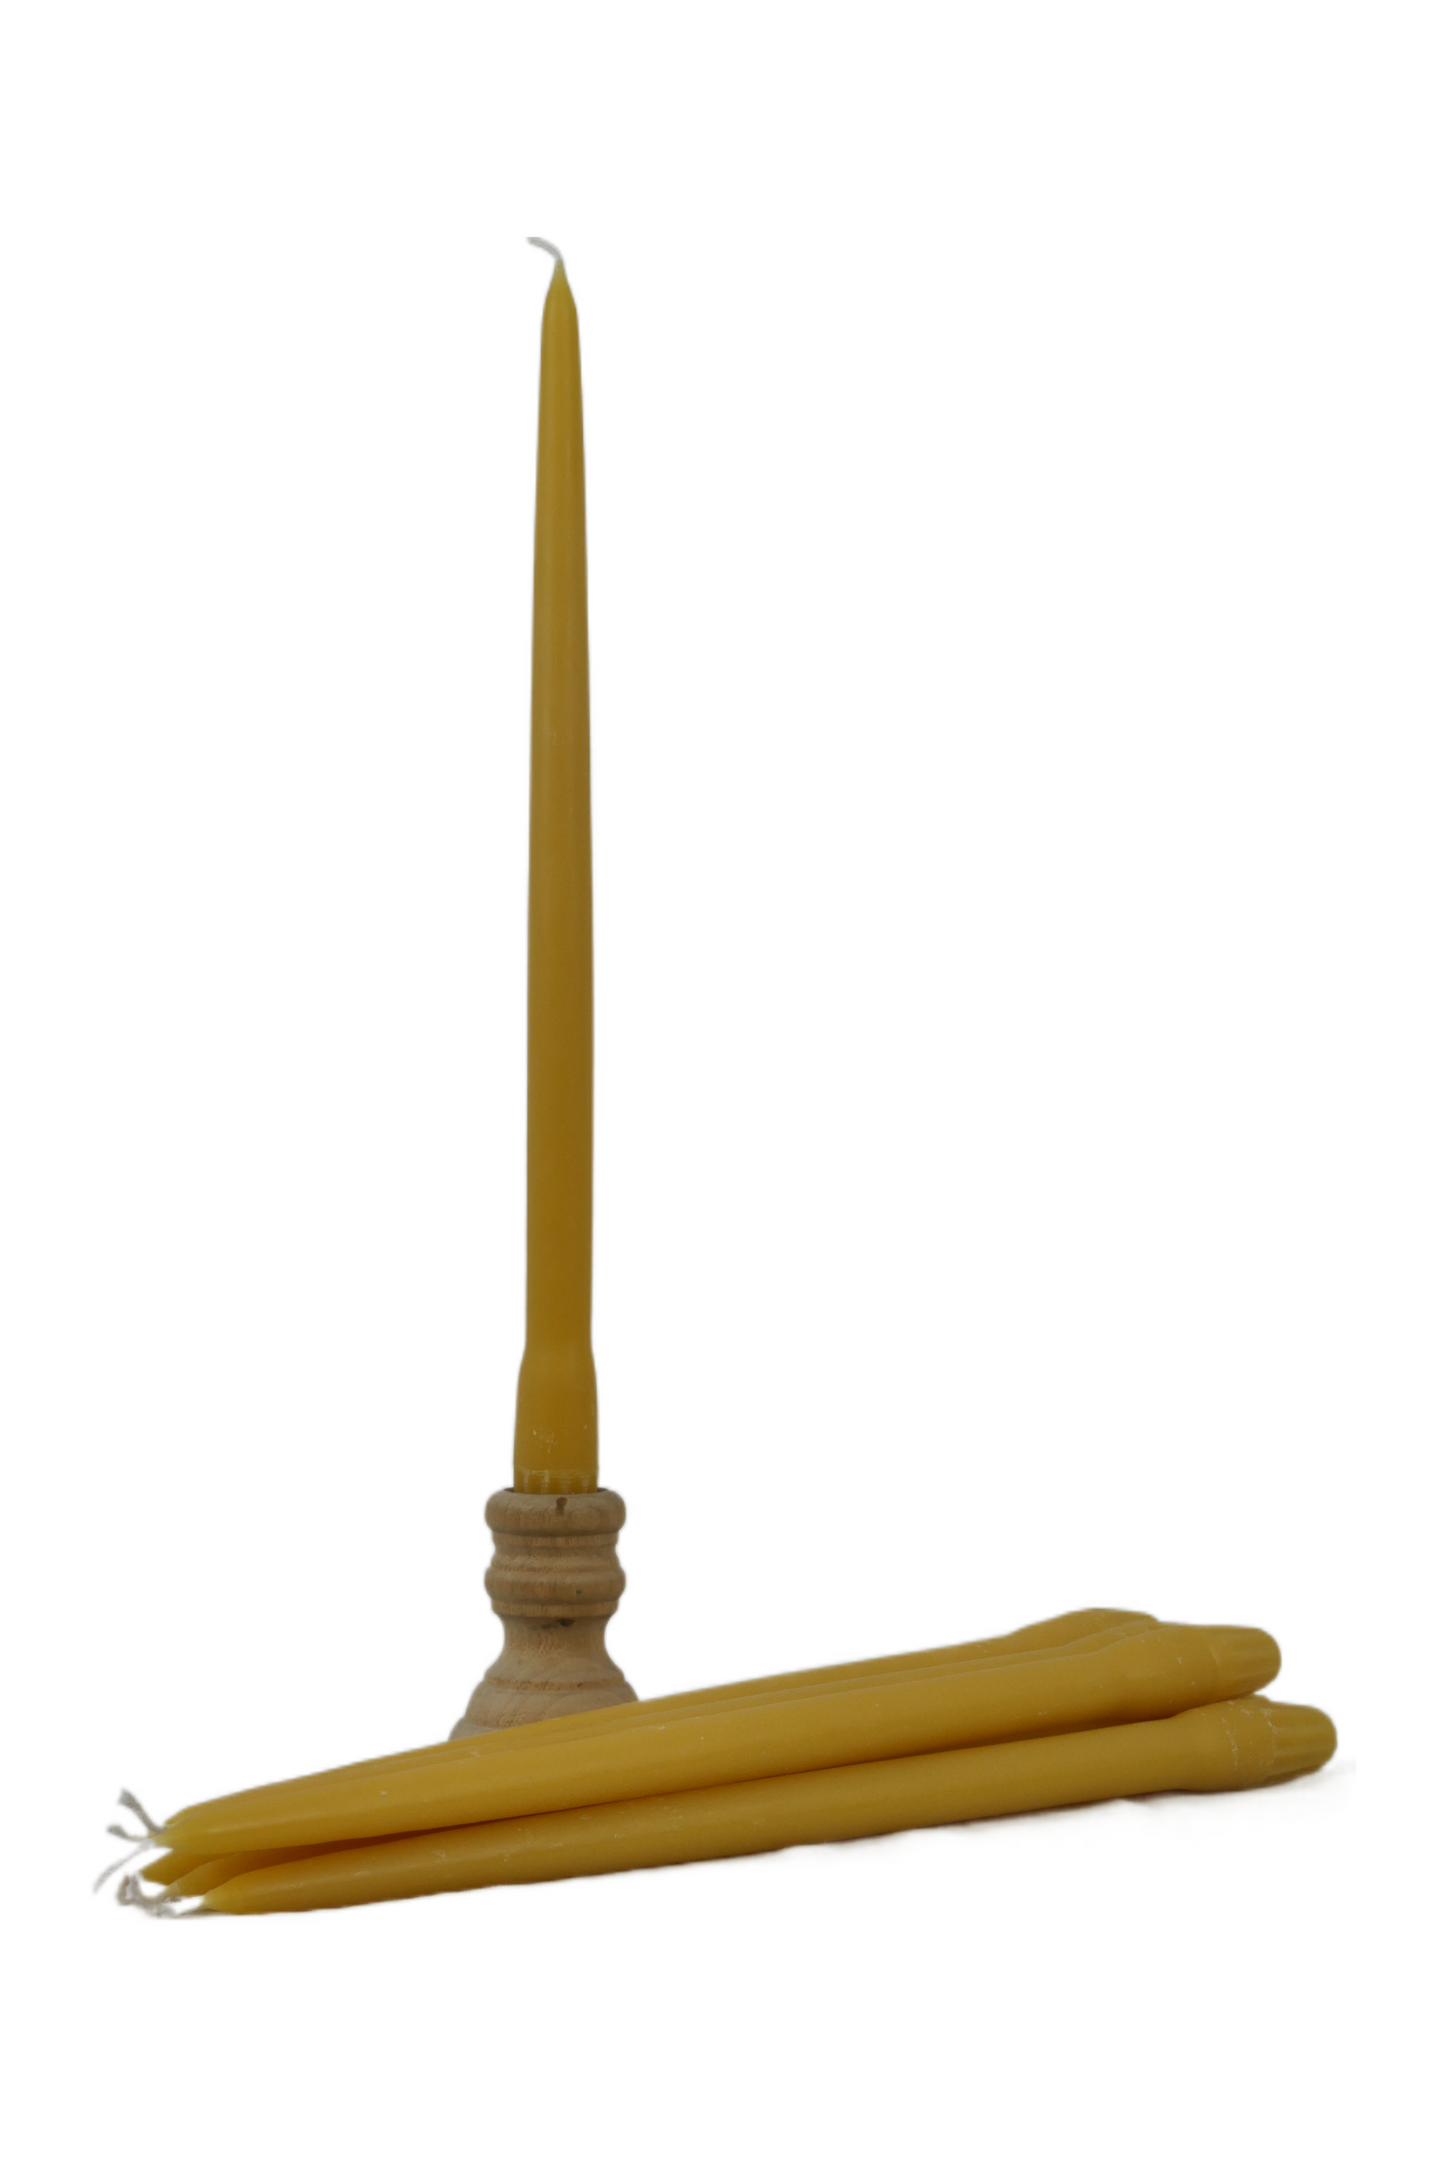 3D-15: Standard Box of Thick Fitted End Candles